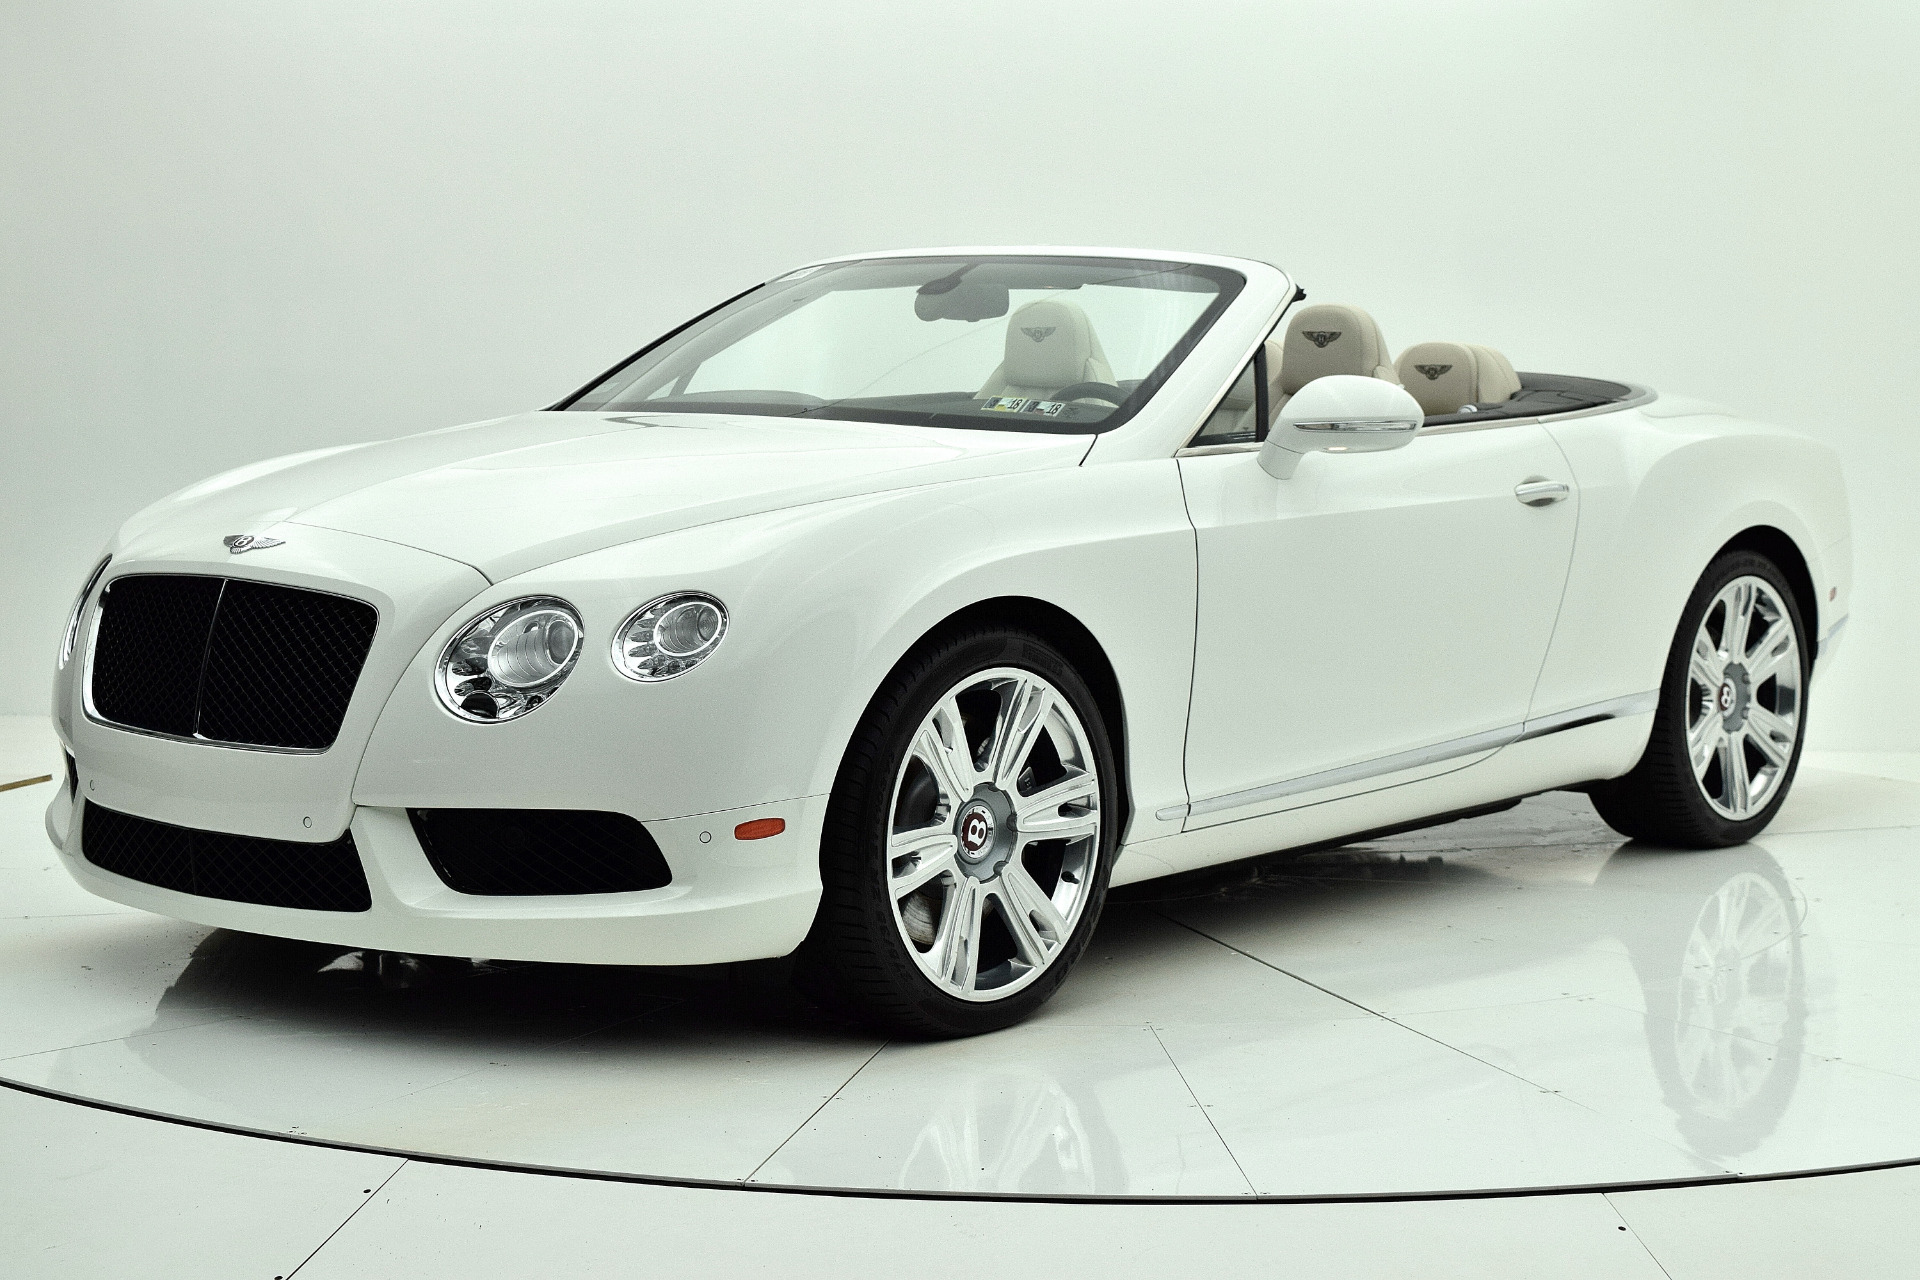 Used 2013 Bentley Continental GT V8 Convertible for sale Sold at Bentley Palmyra N.J. in Palmyra NJ 08065 2